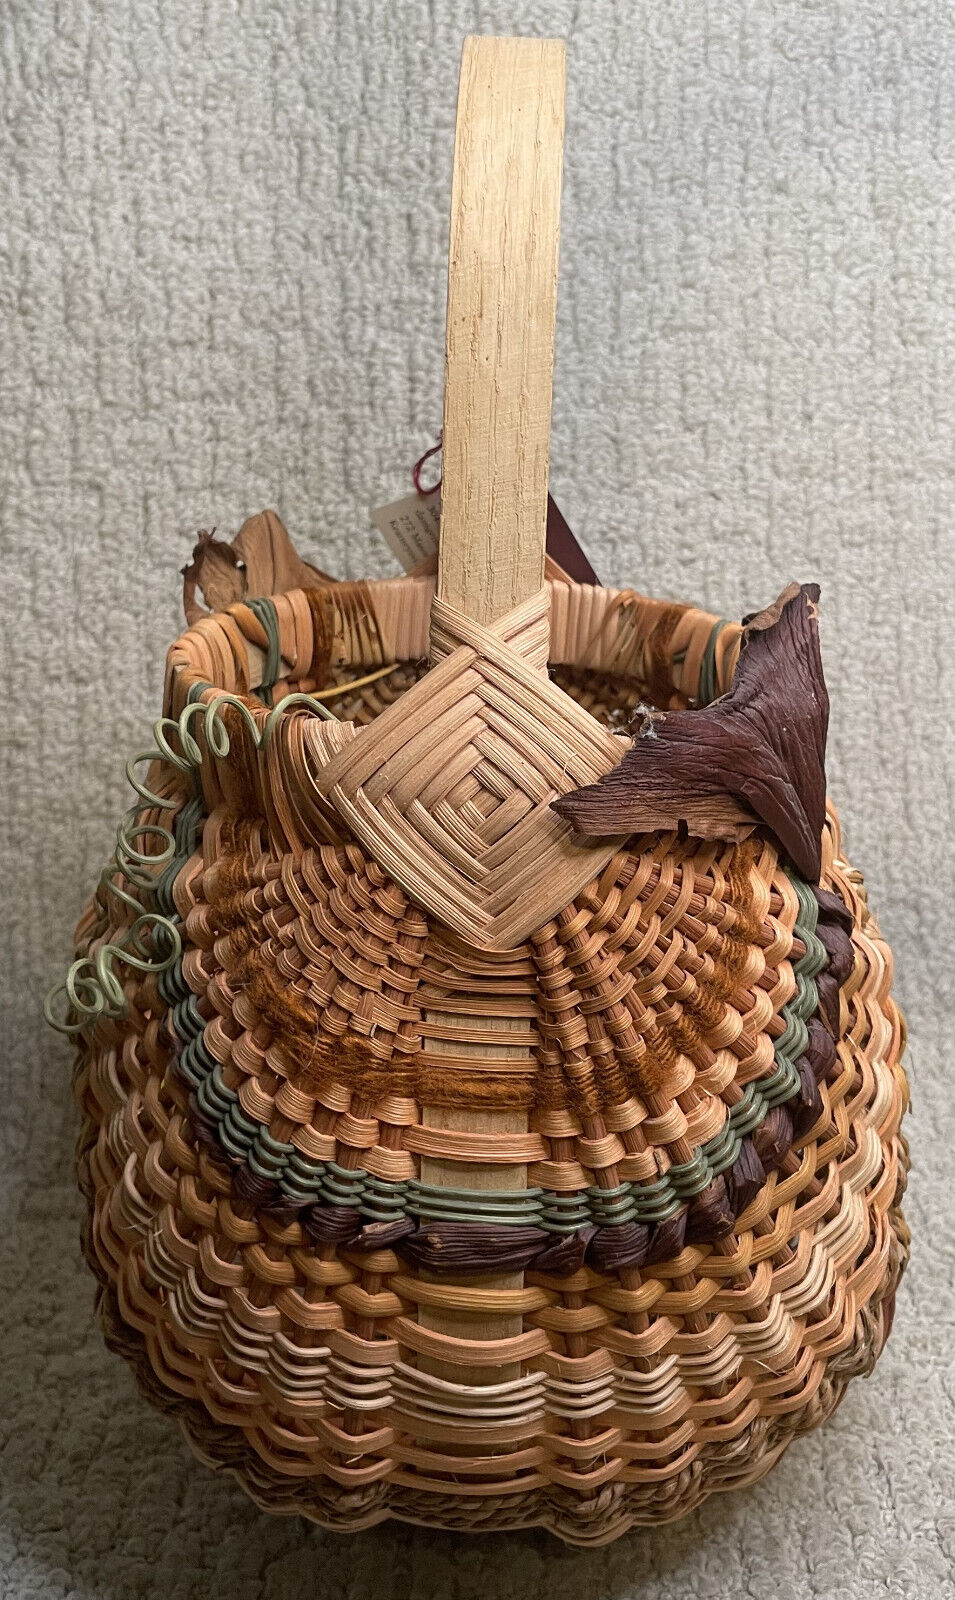 Anne Bowers Fall Butternut Squash Basket NWT Hand Crafted Large Autumn